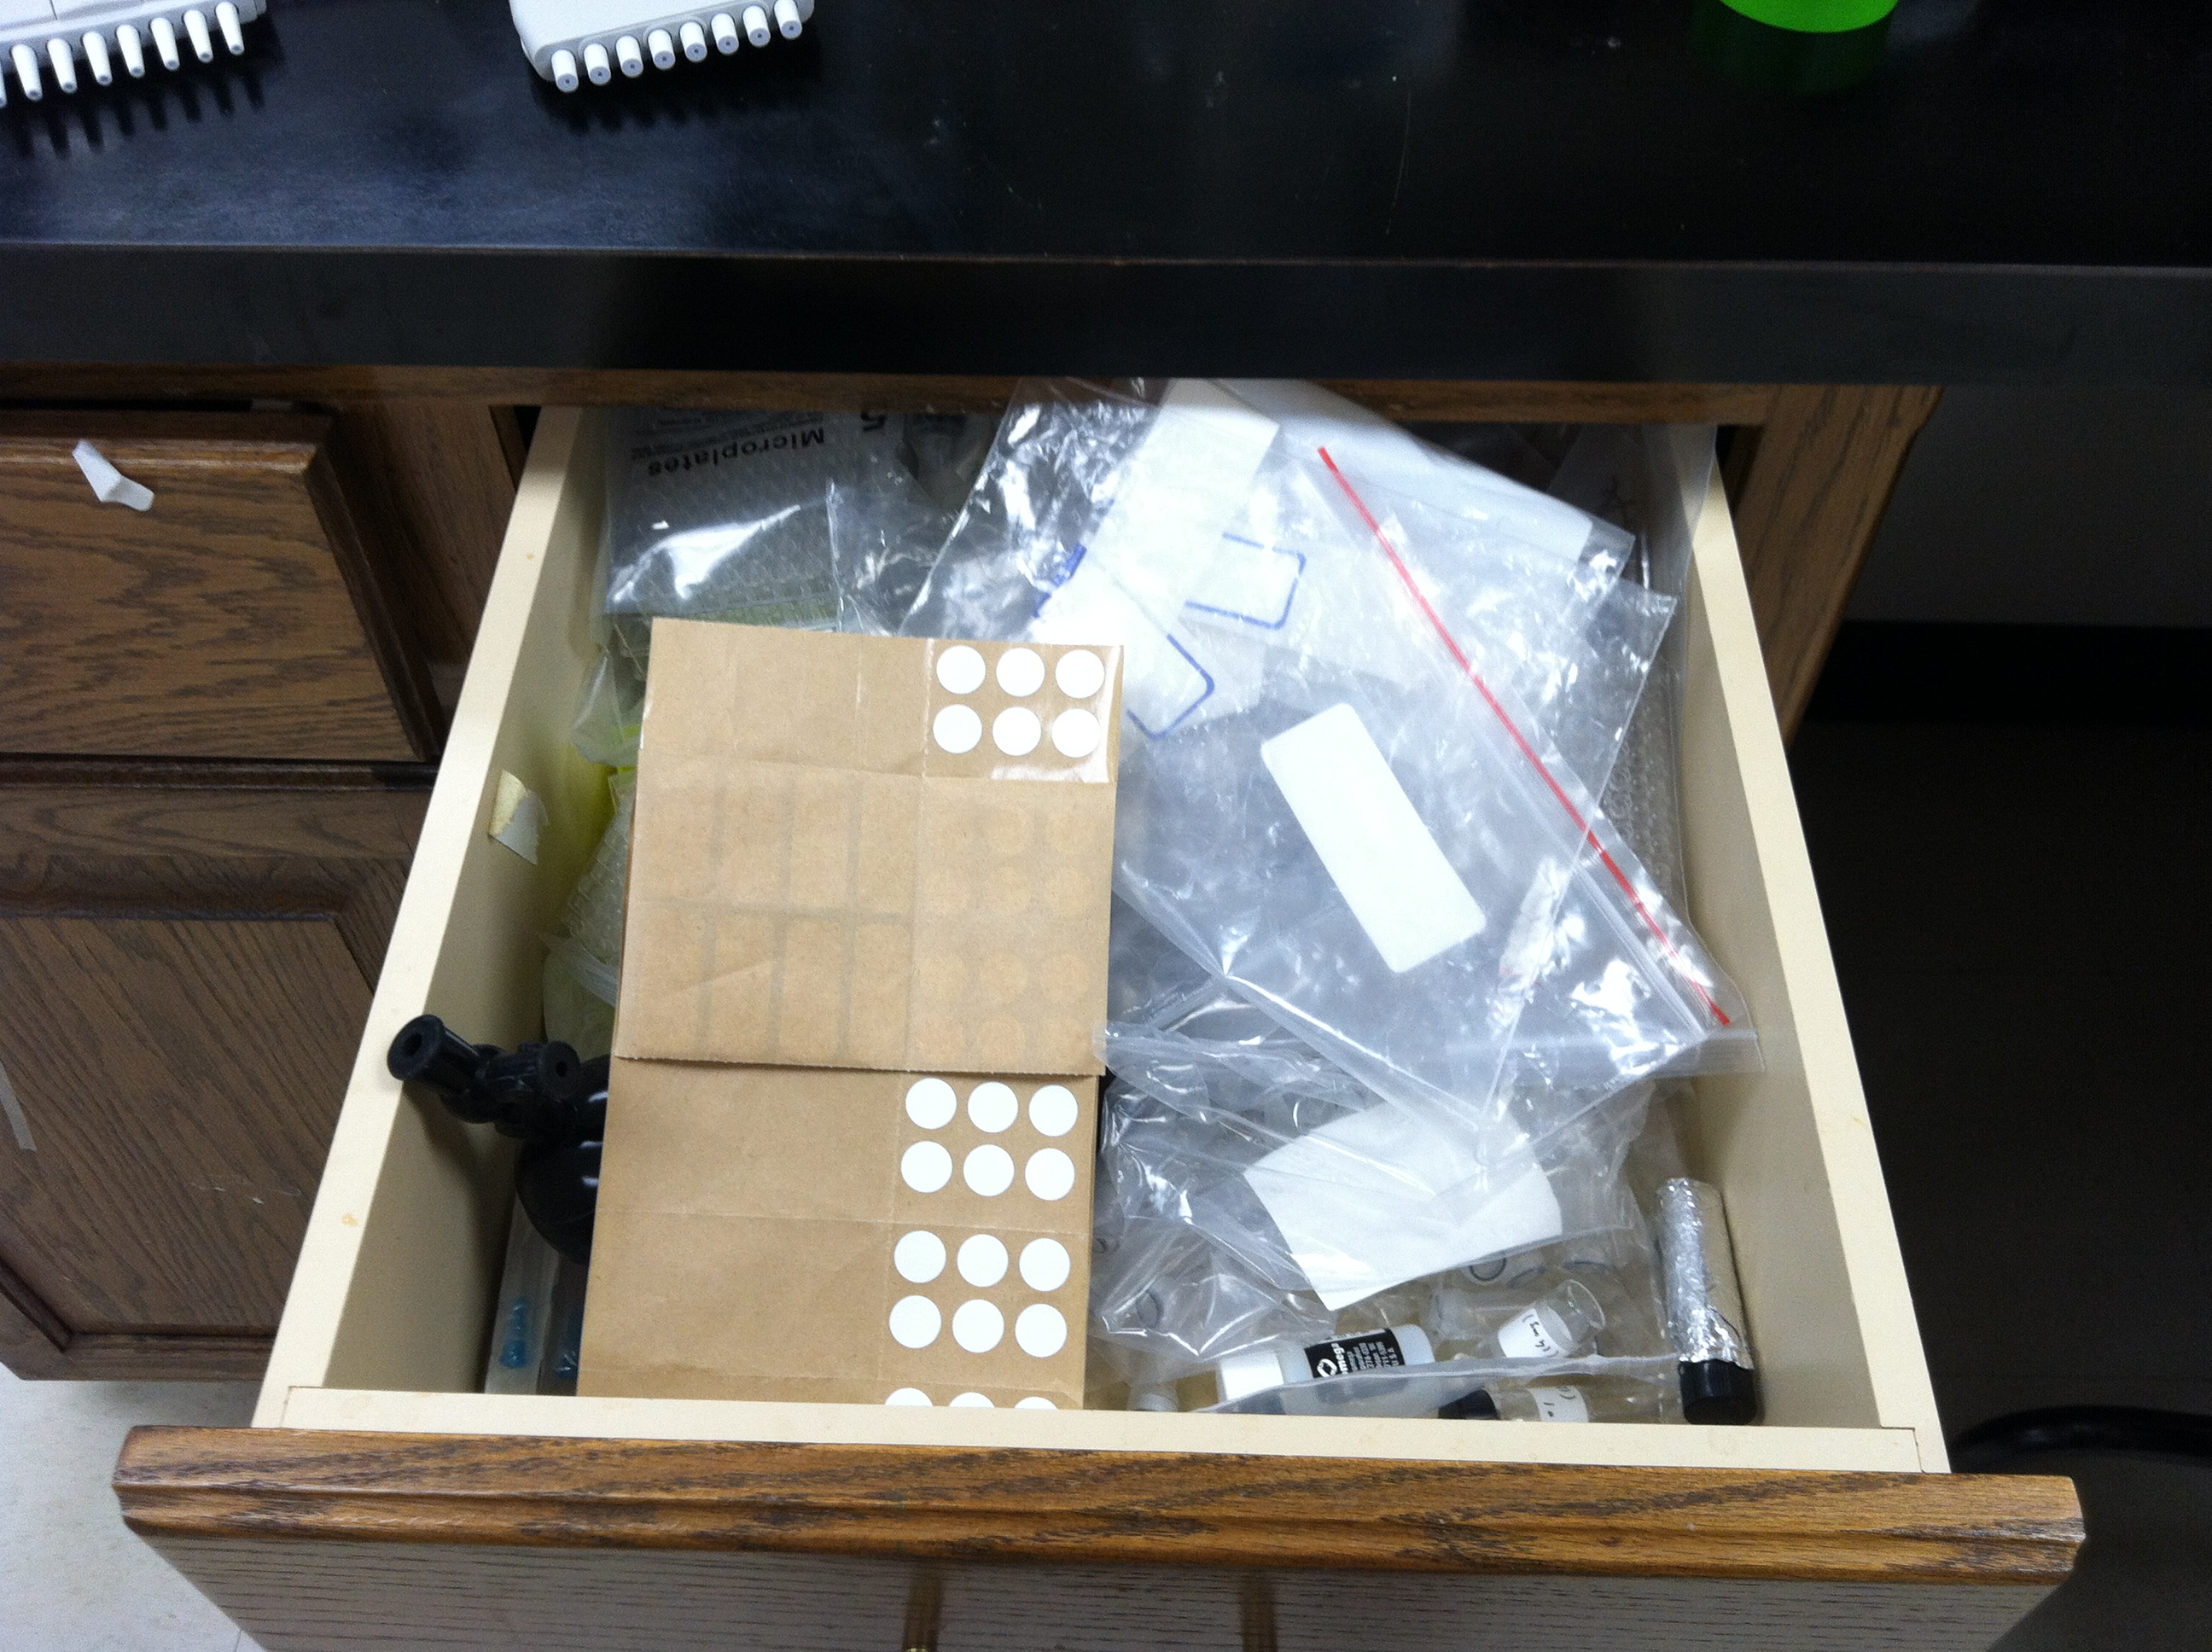 The bag drawer: complete with random, old empty glass vials.